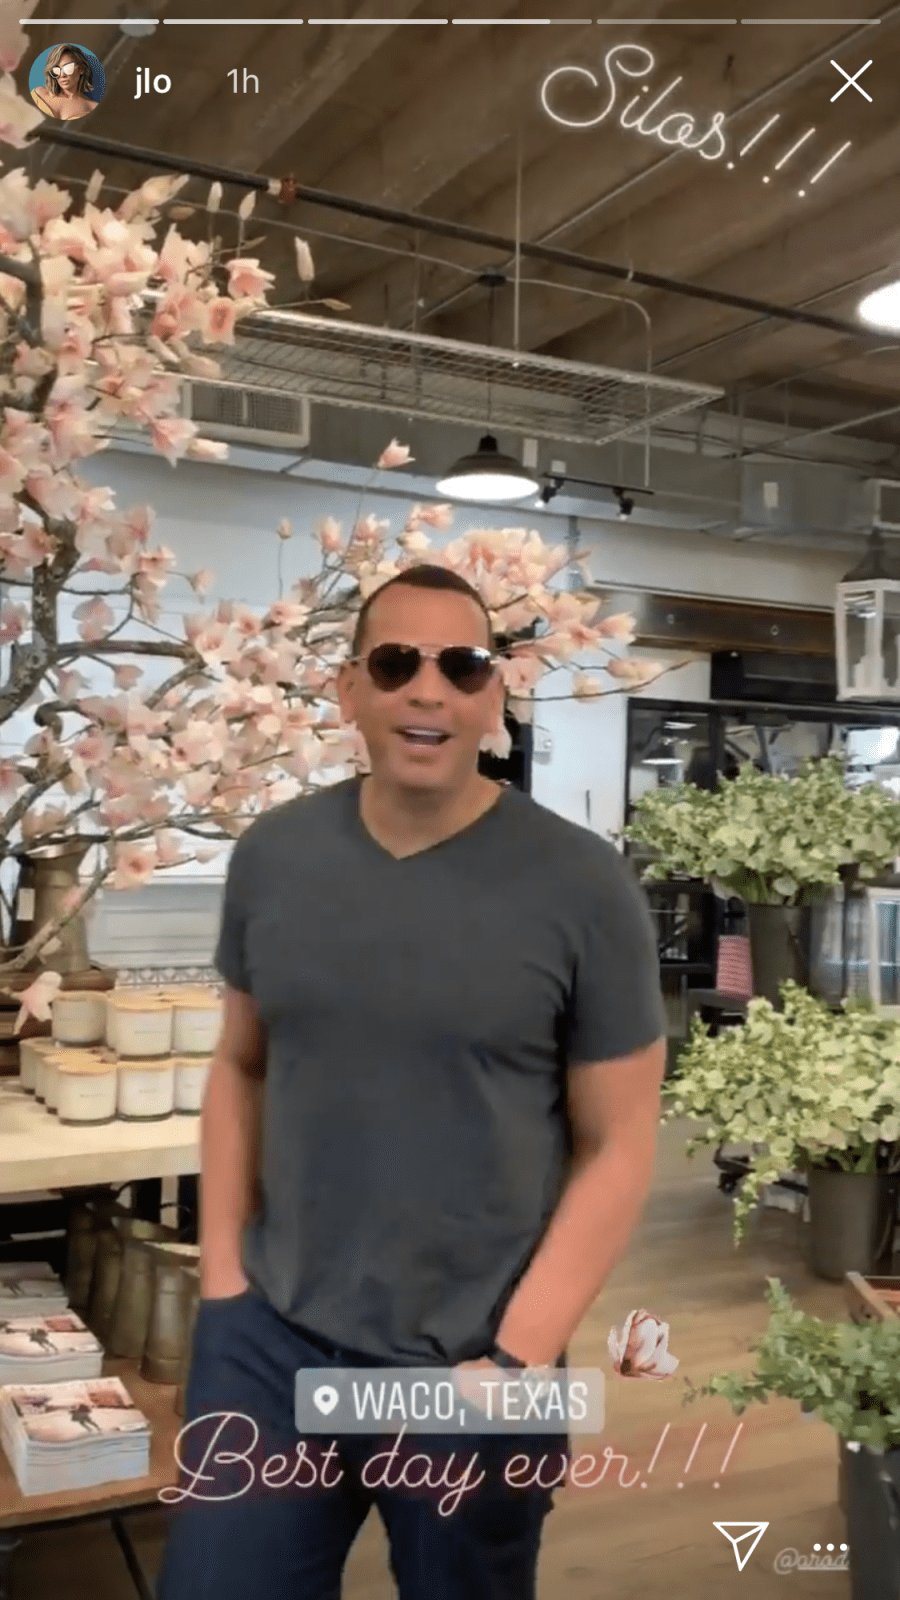 Jennifer Lopez, Alex Rodriguez Meet Up With Chip and Joanna Gaines: Pics